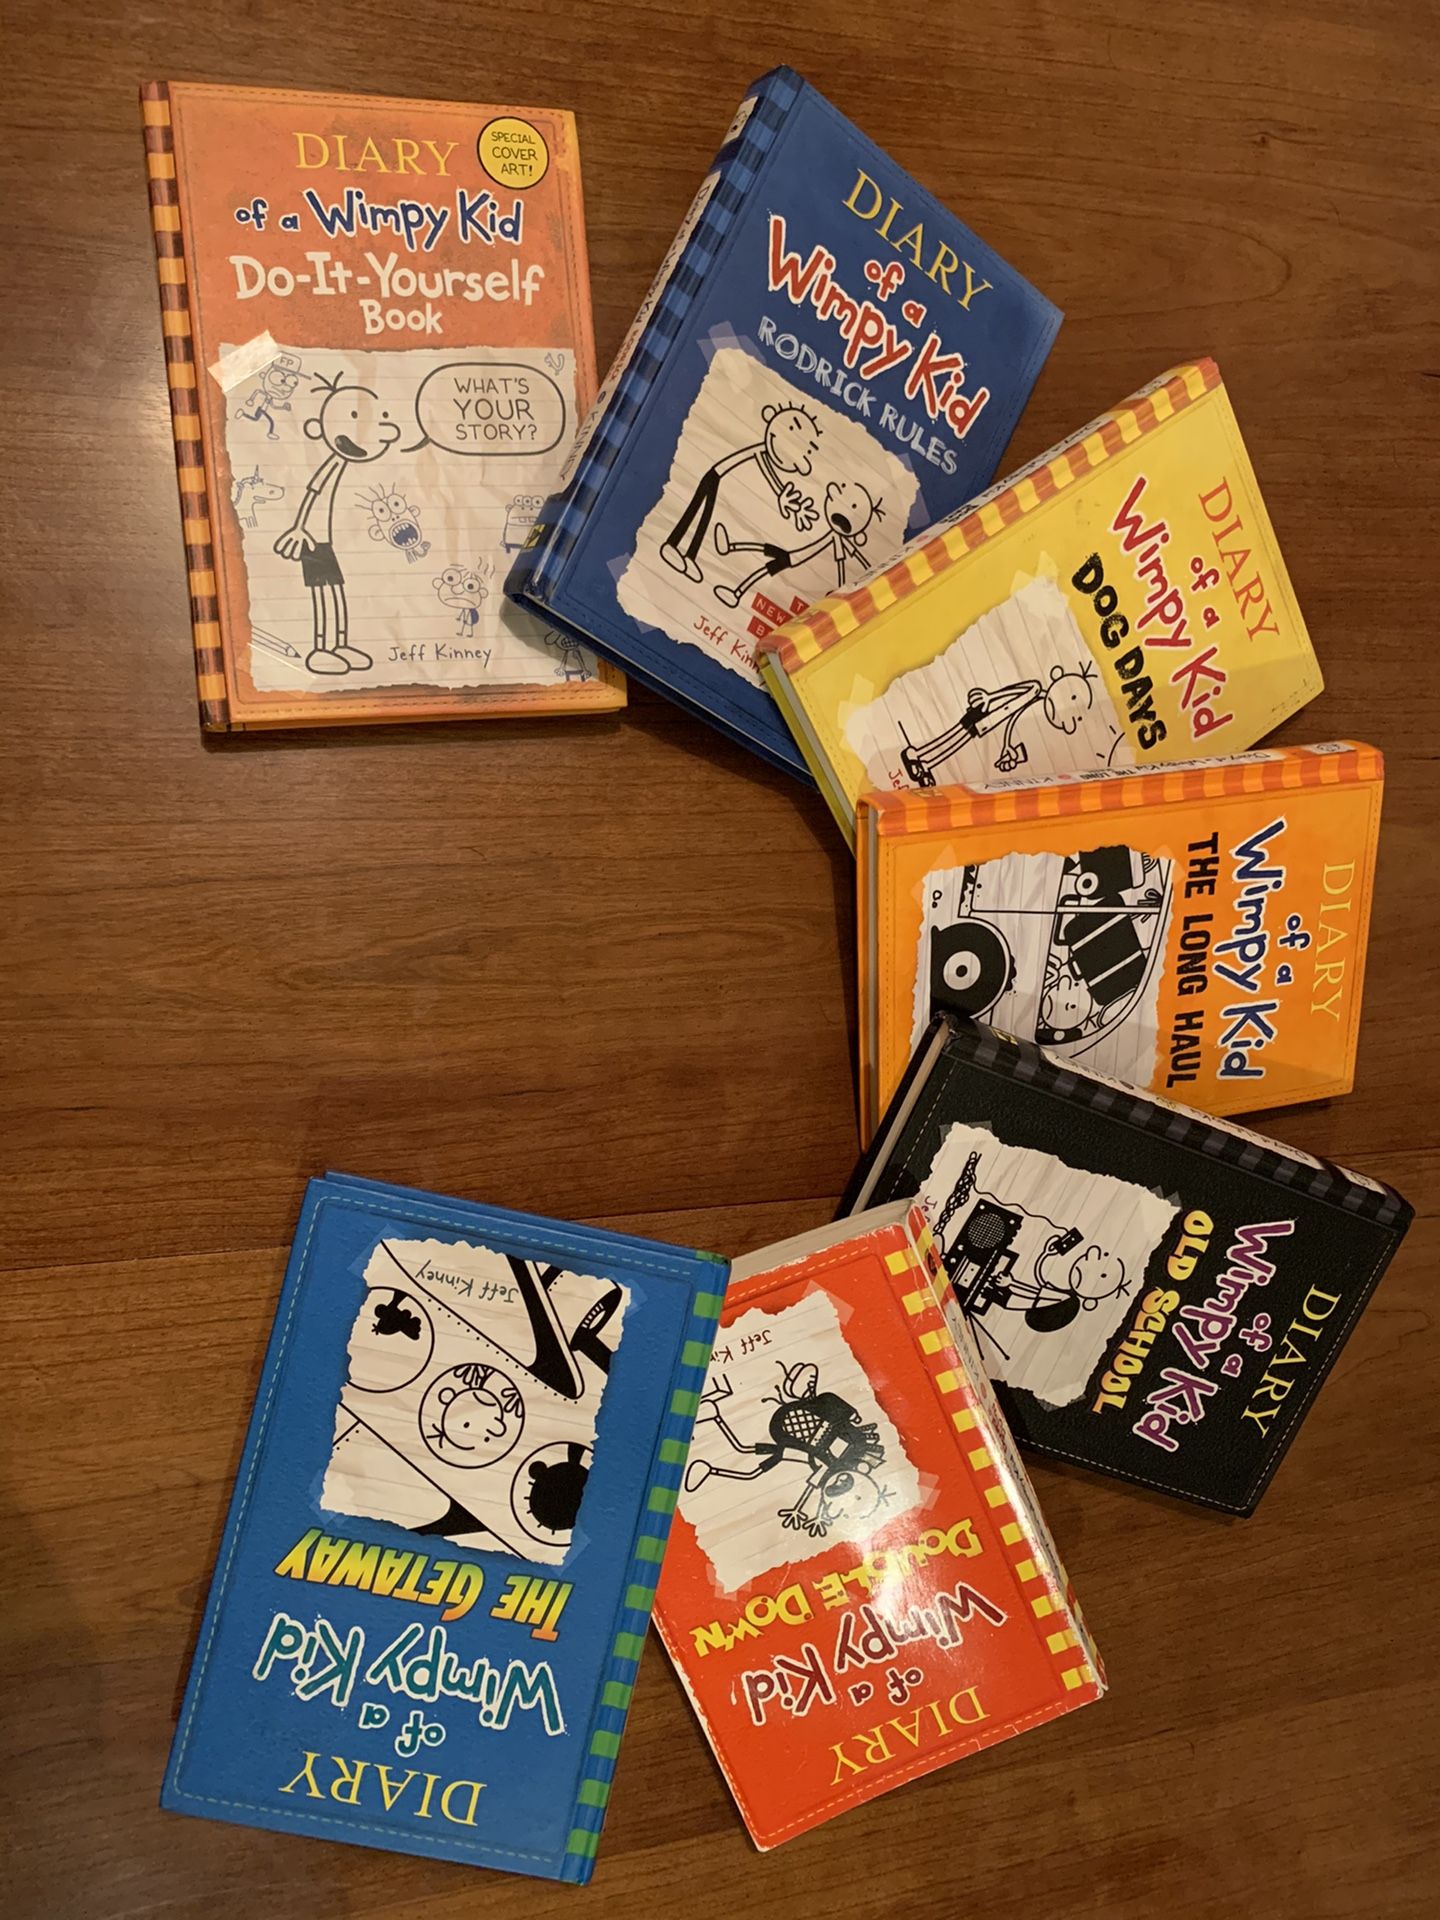 DIARY of Wimpy Kid books